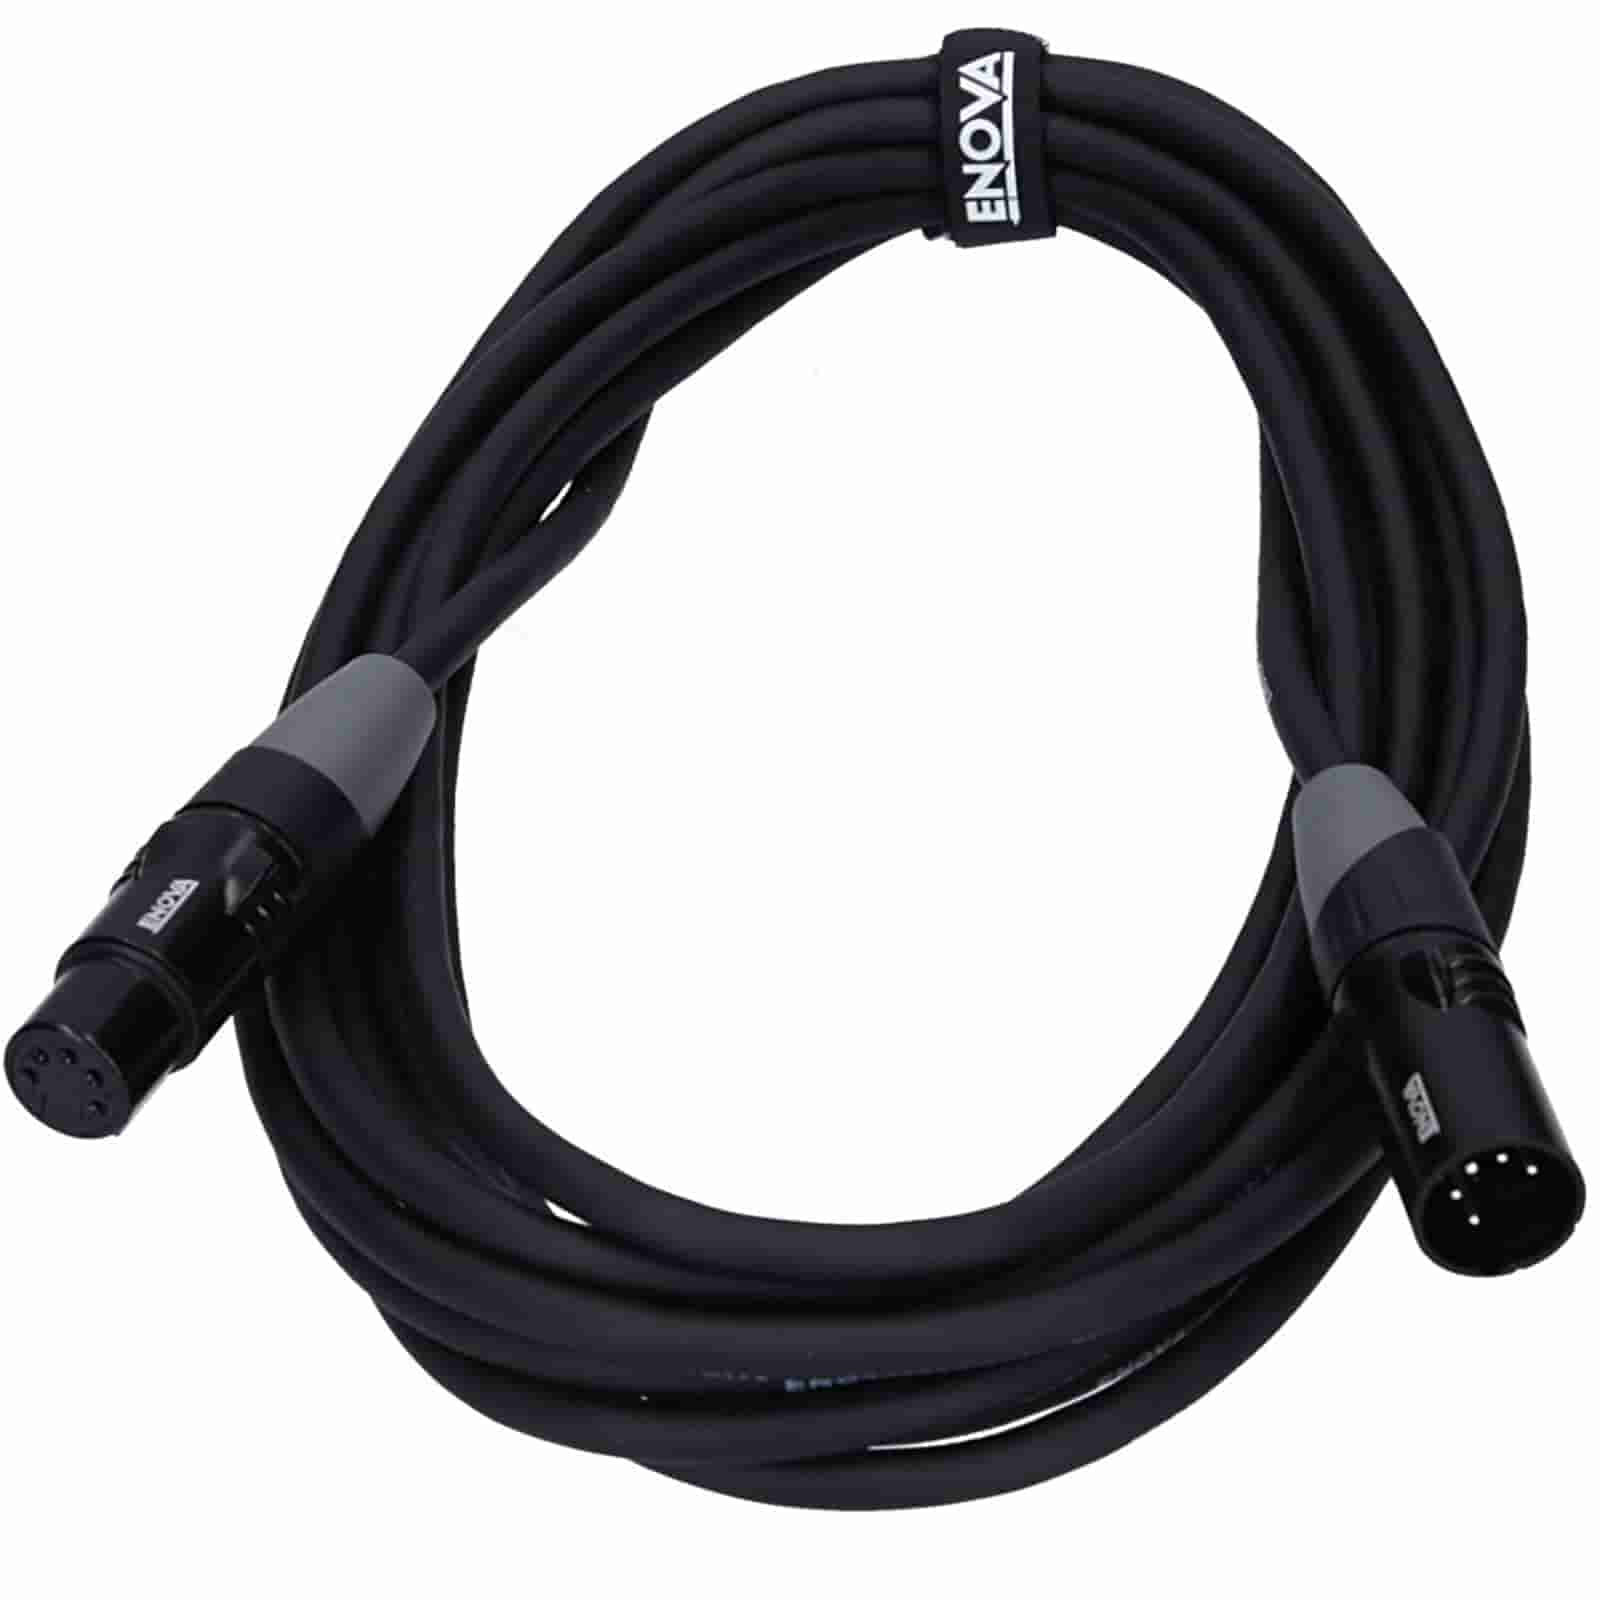 0.5 meter DMX cable with 5 pin XLR connector for professional lighting applications | Enova - Pro AV Connectors & Pro Interconnect Cables